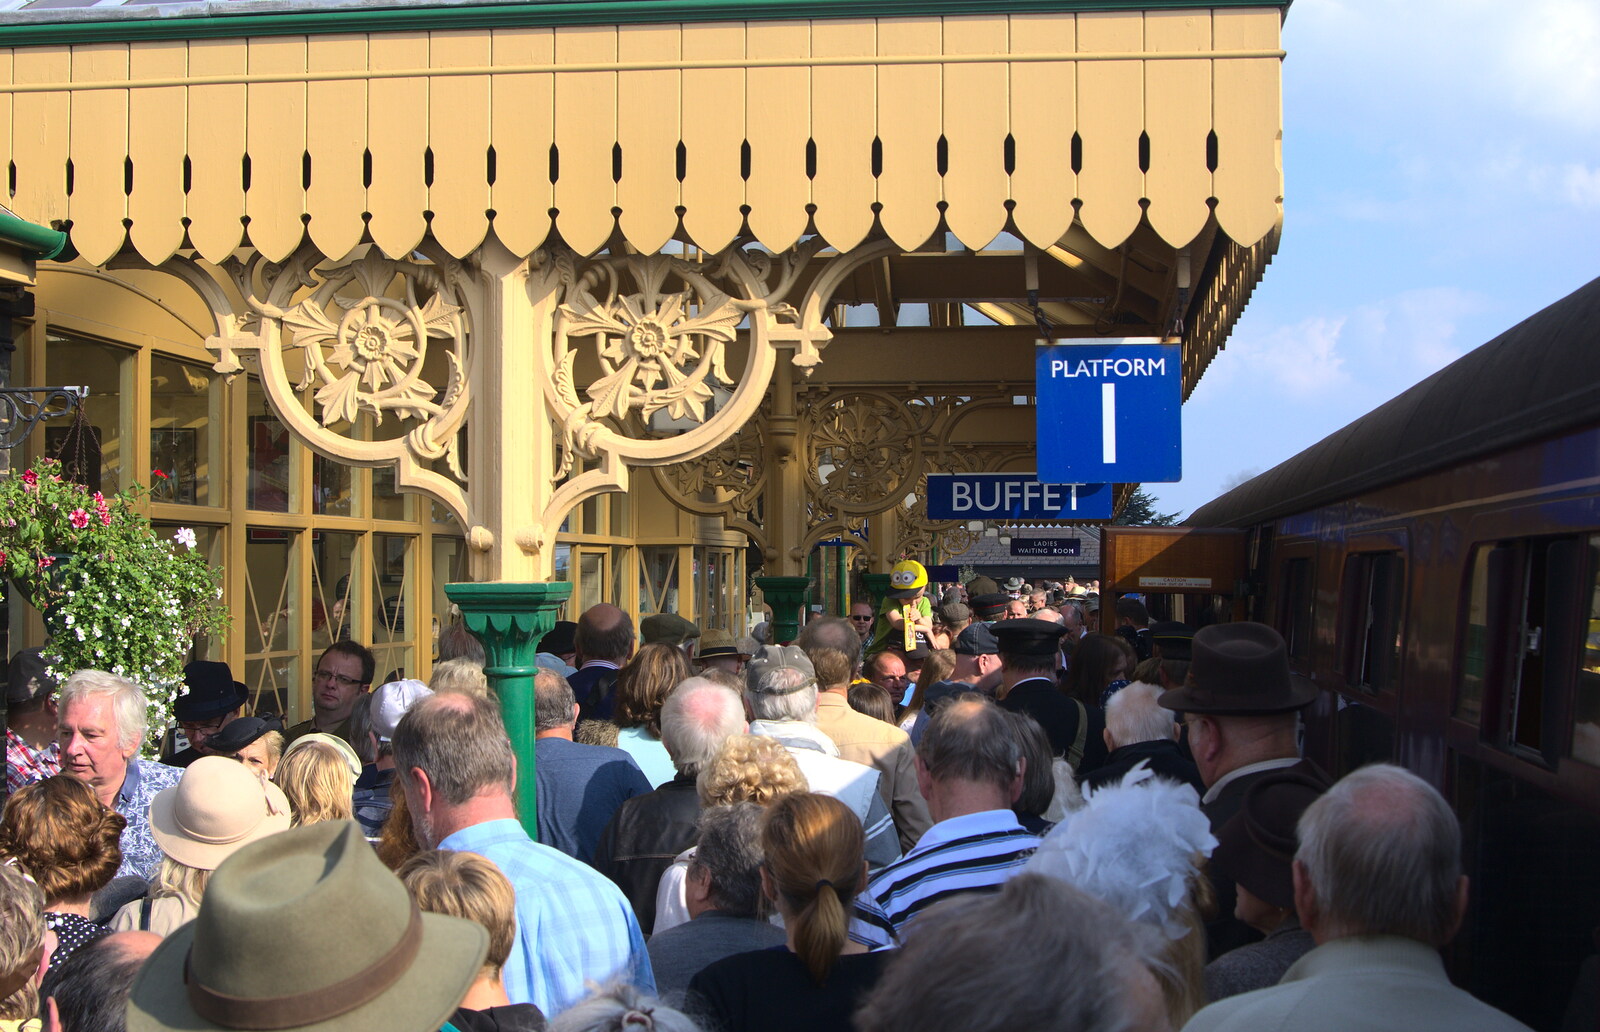 Sheringham Station is packed from A Steamy 1940s Day Out, Holt and Sheringham, Norfolk - 20th September 2015